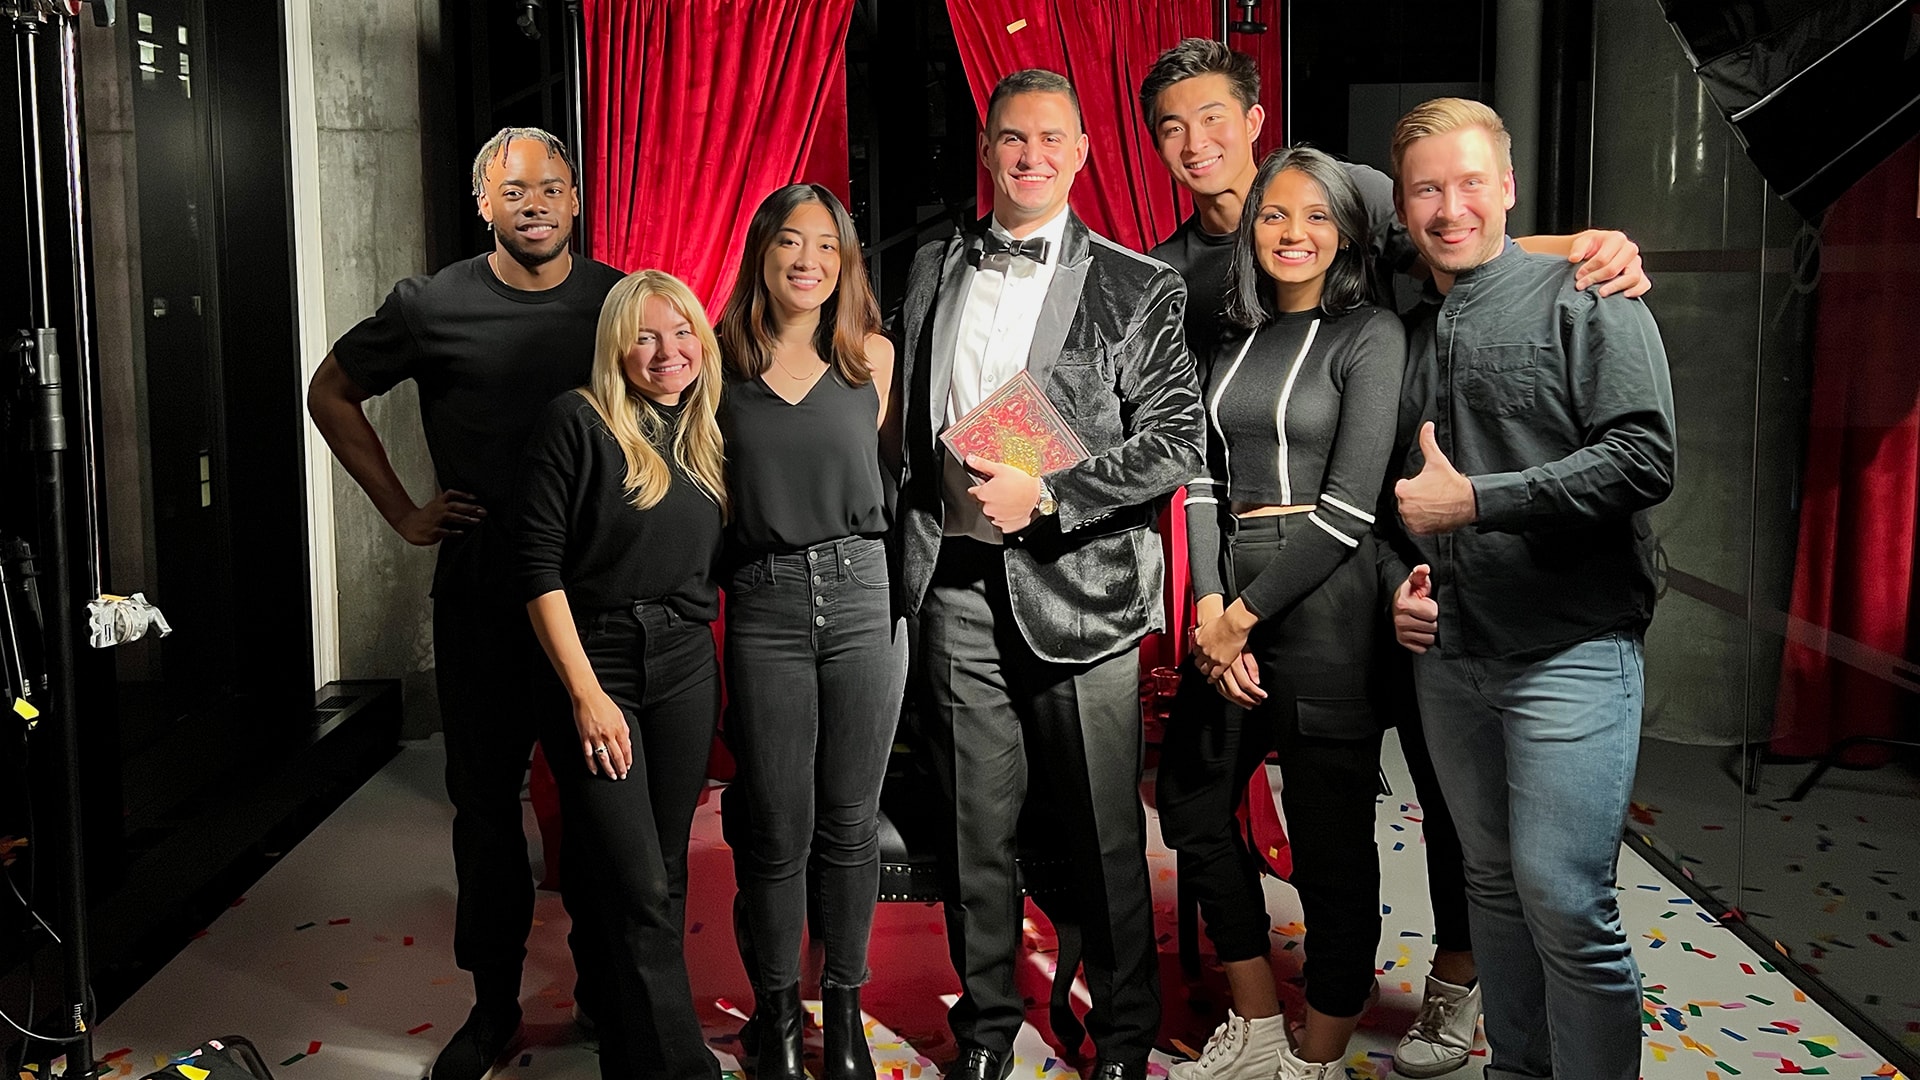 A group of Yext employees smiling for a photo with John Vatalaro in the middle wearing a suit for the Season of Search video